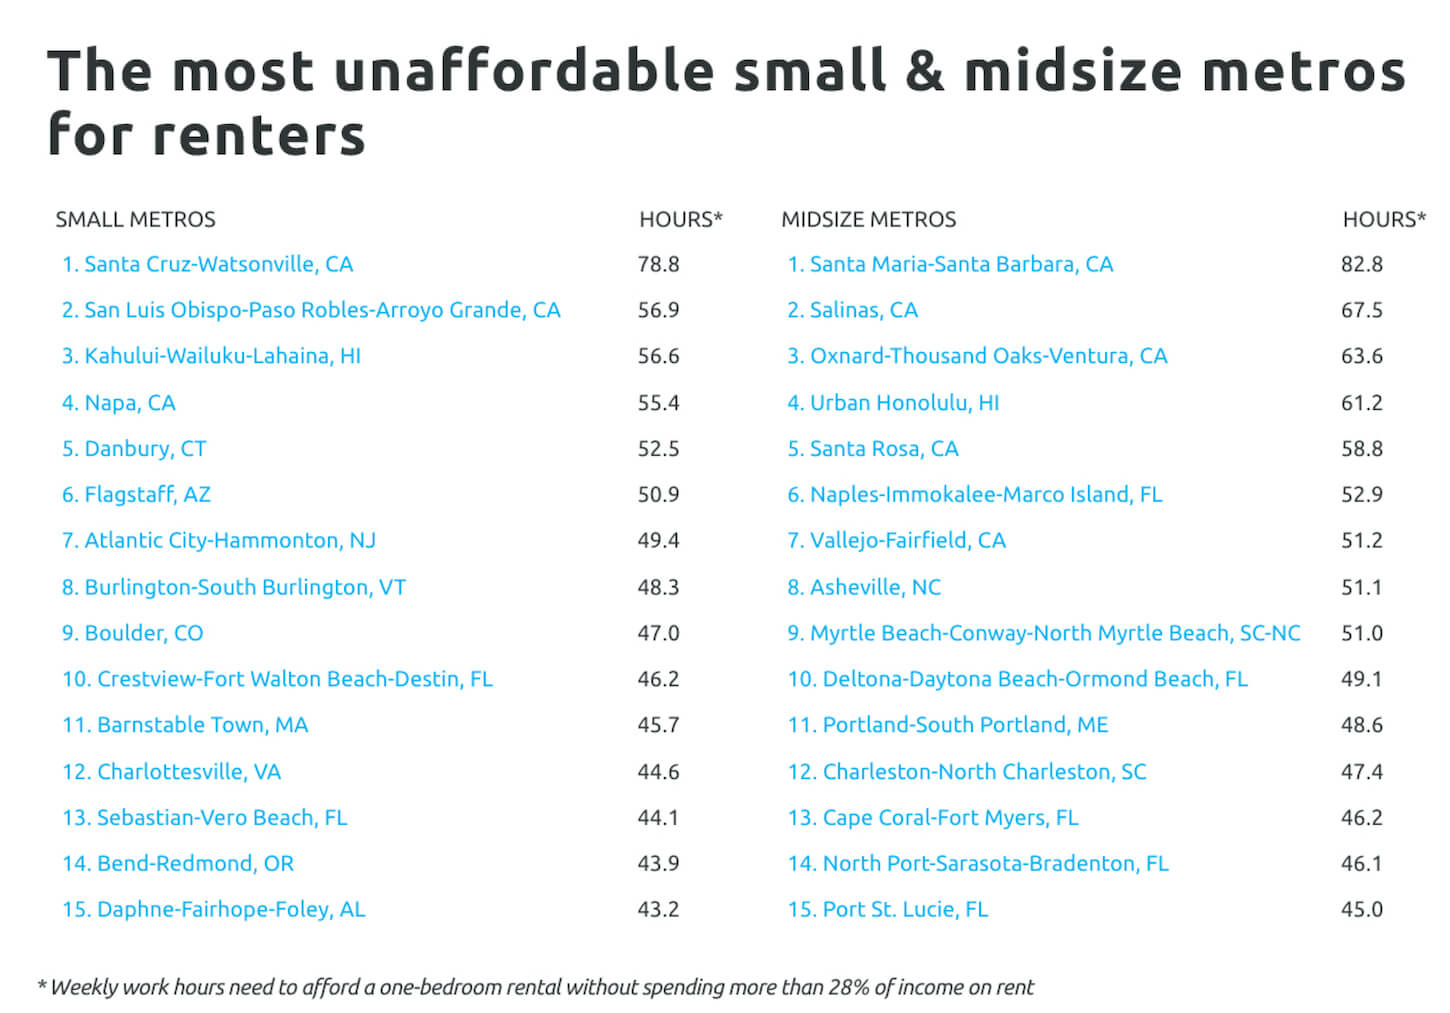 hours to pay rent Chart3 The most unaffordable small and midsize metros for renters